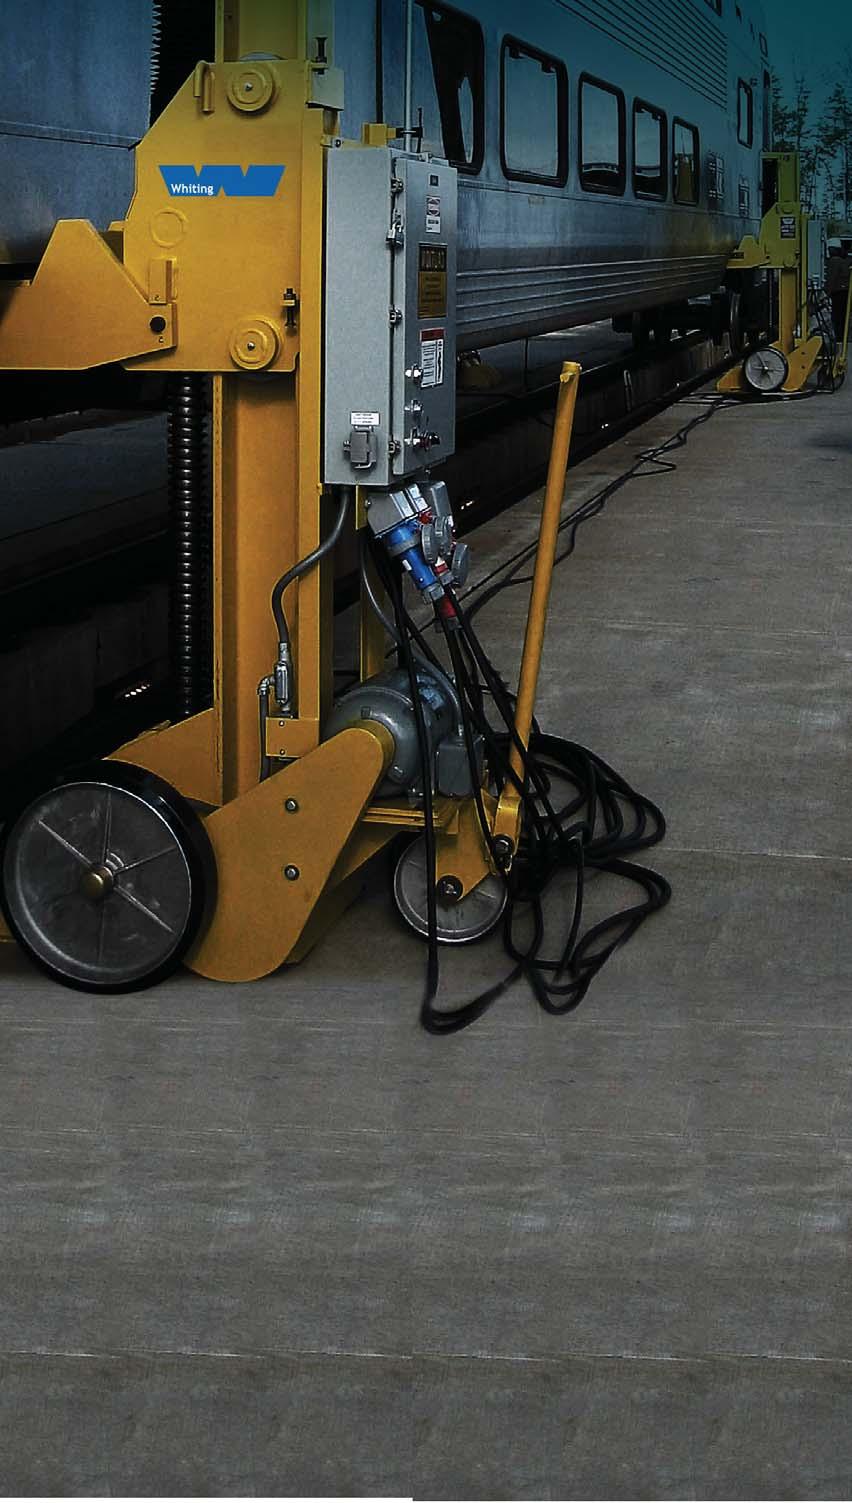 PORTABLE ELECTRIC JACKS High precision engineering ensures Whiting portable electric jacks provide you with the dependable service your rail operation needs, while at the same time ensuring the